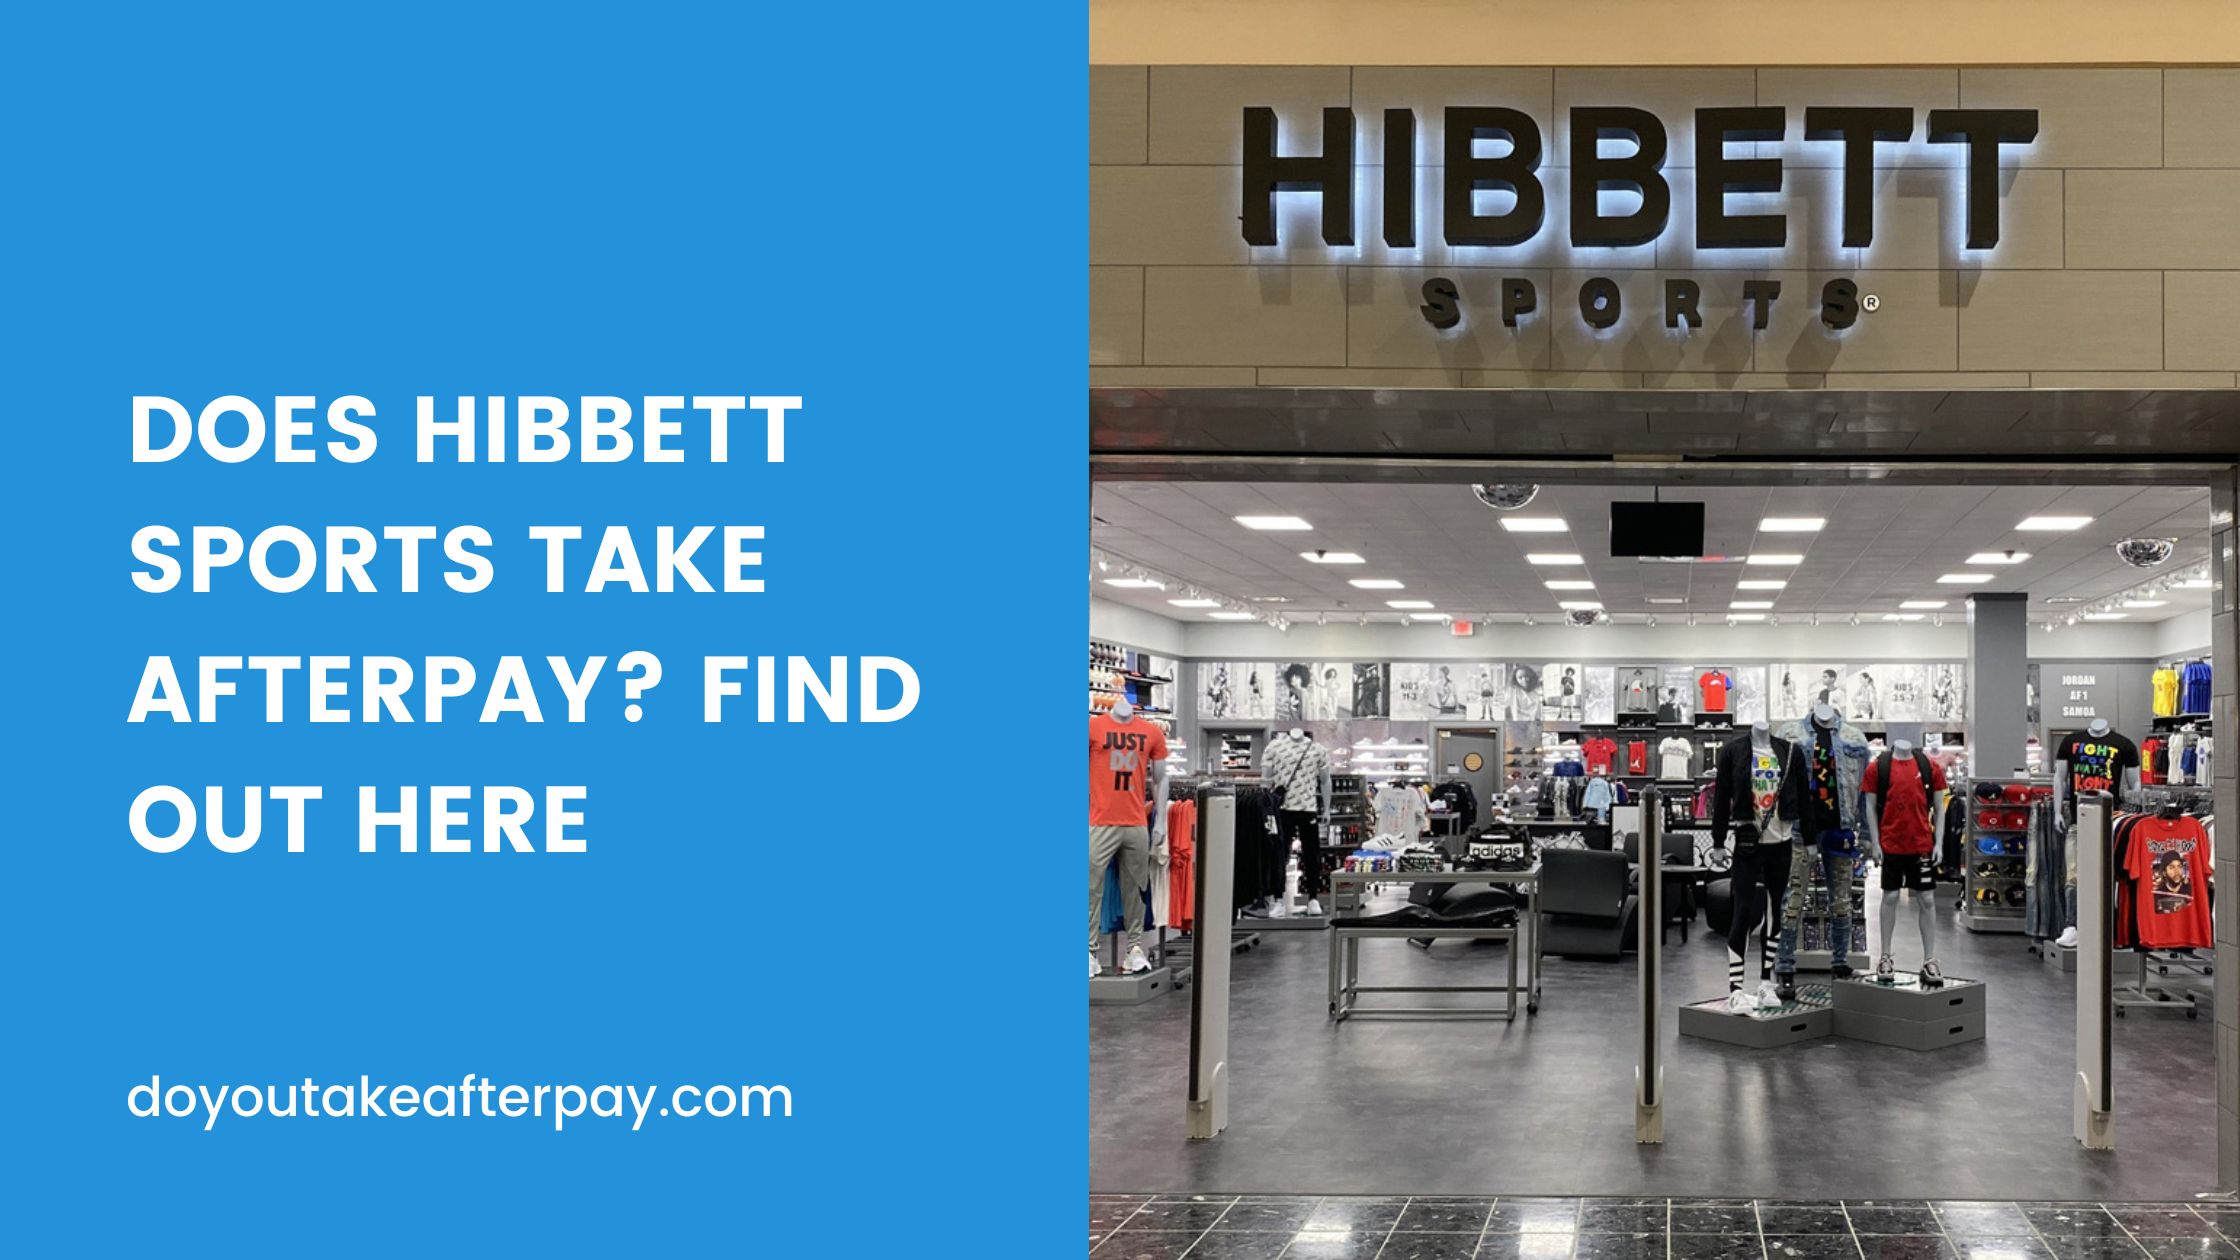 Does Hibbett Sports Take Afterpay